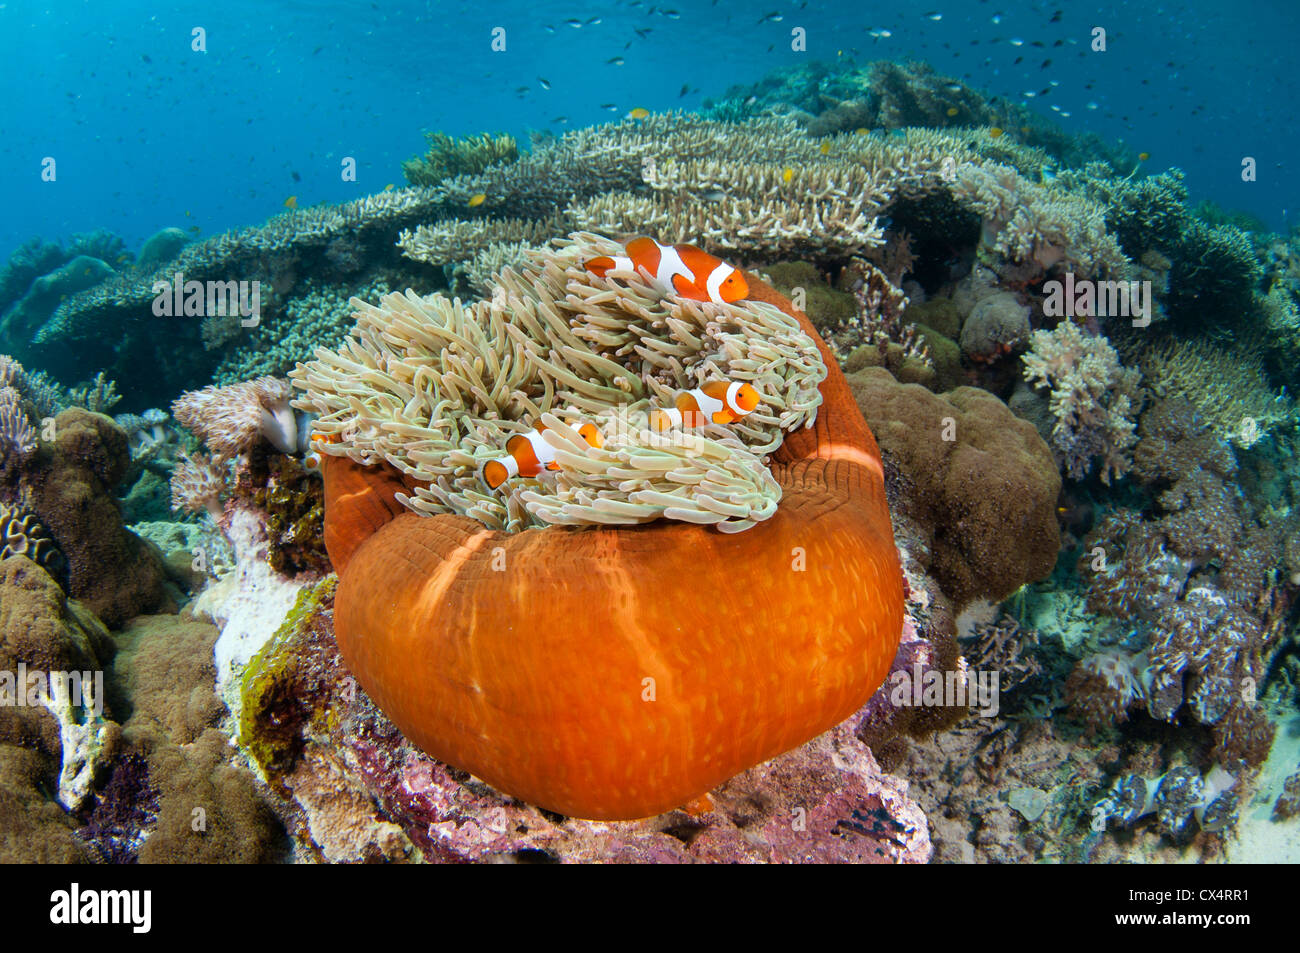 A magnificent anemone, Heteractis magnifica, in a shallow hard coral garden featuring several species of hard coral Stock Photo